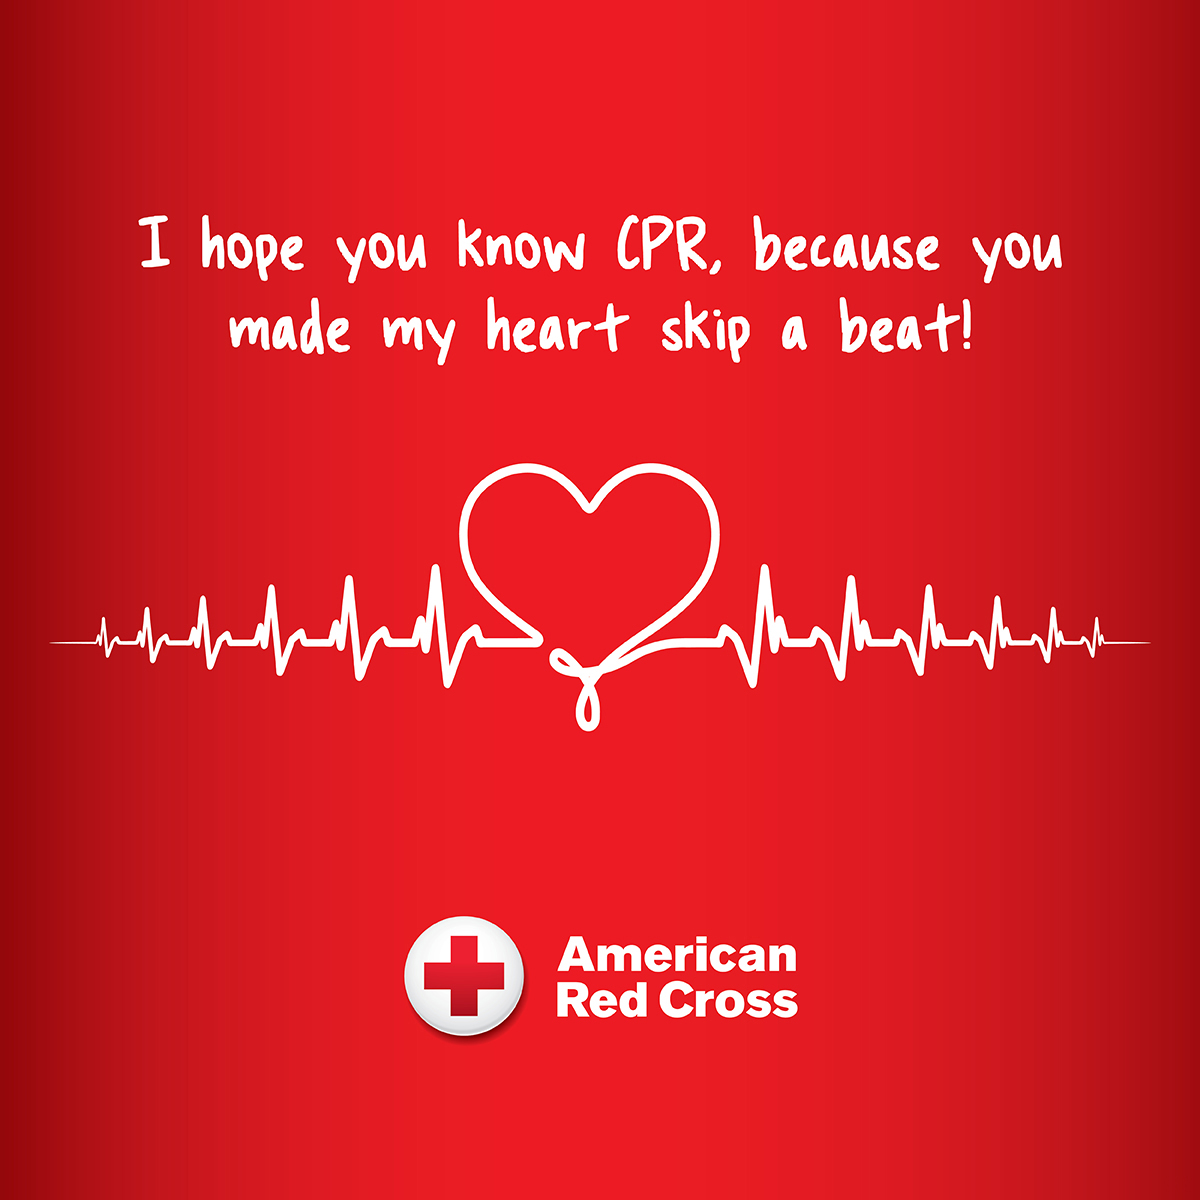 I hope you know CPR, you made my heart skip a beat.